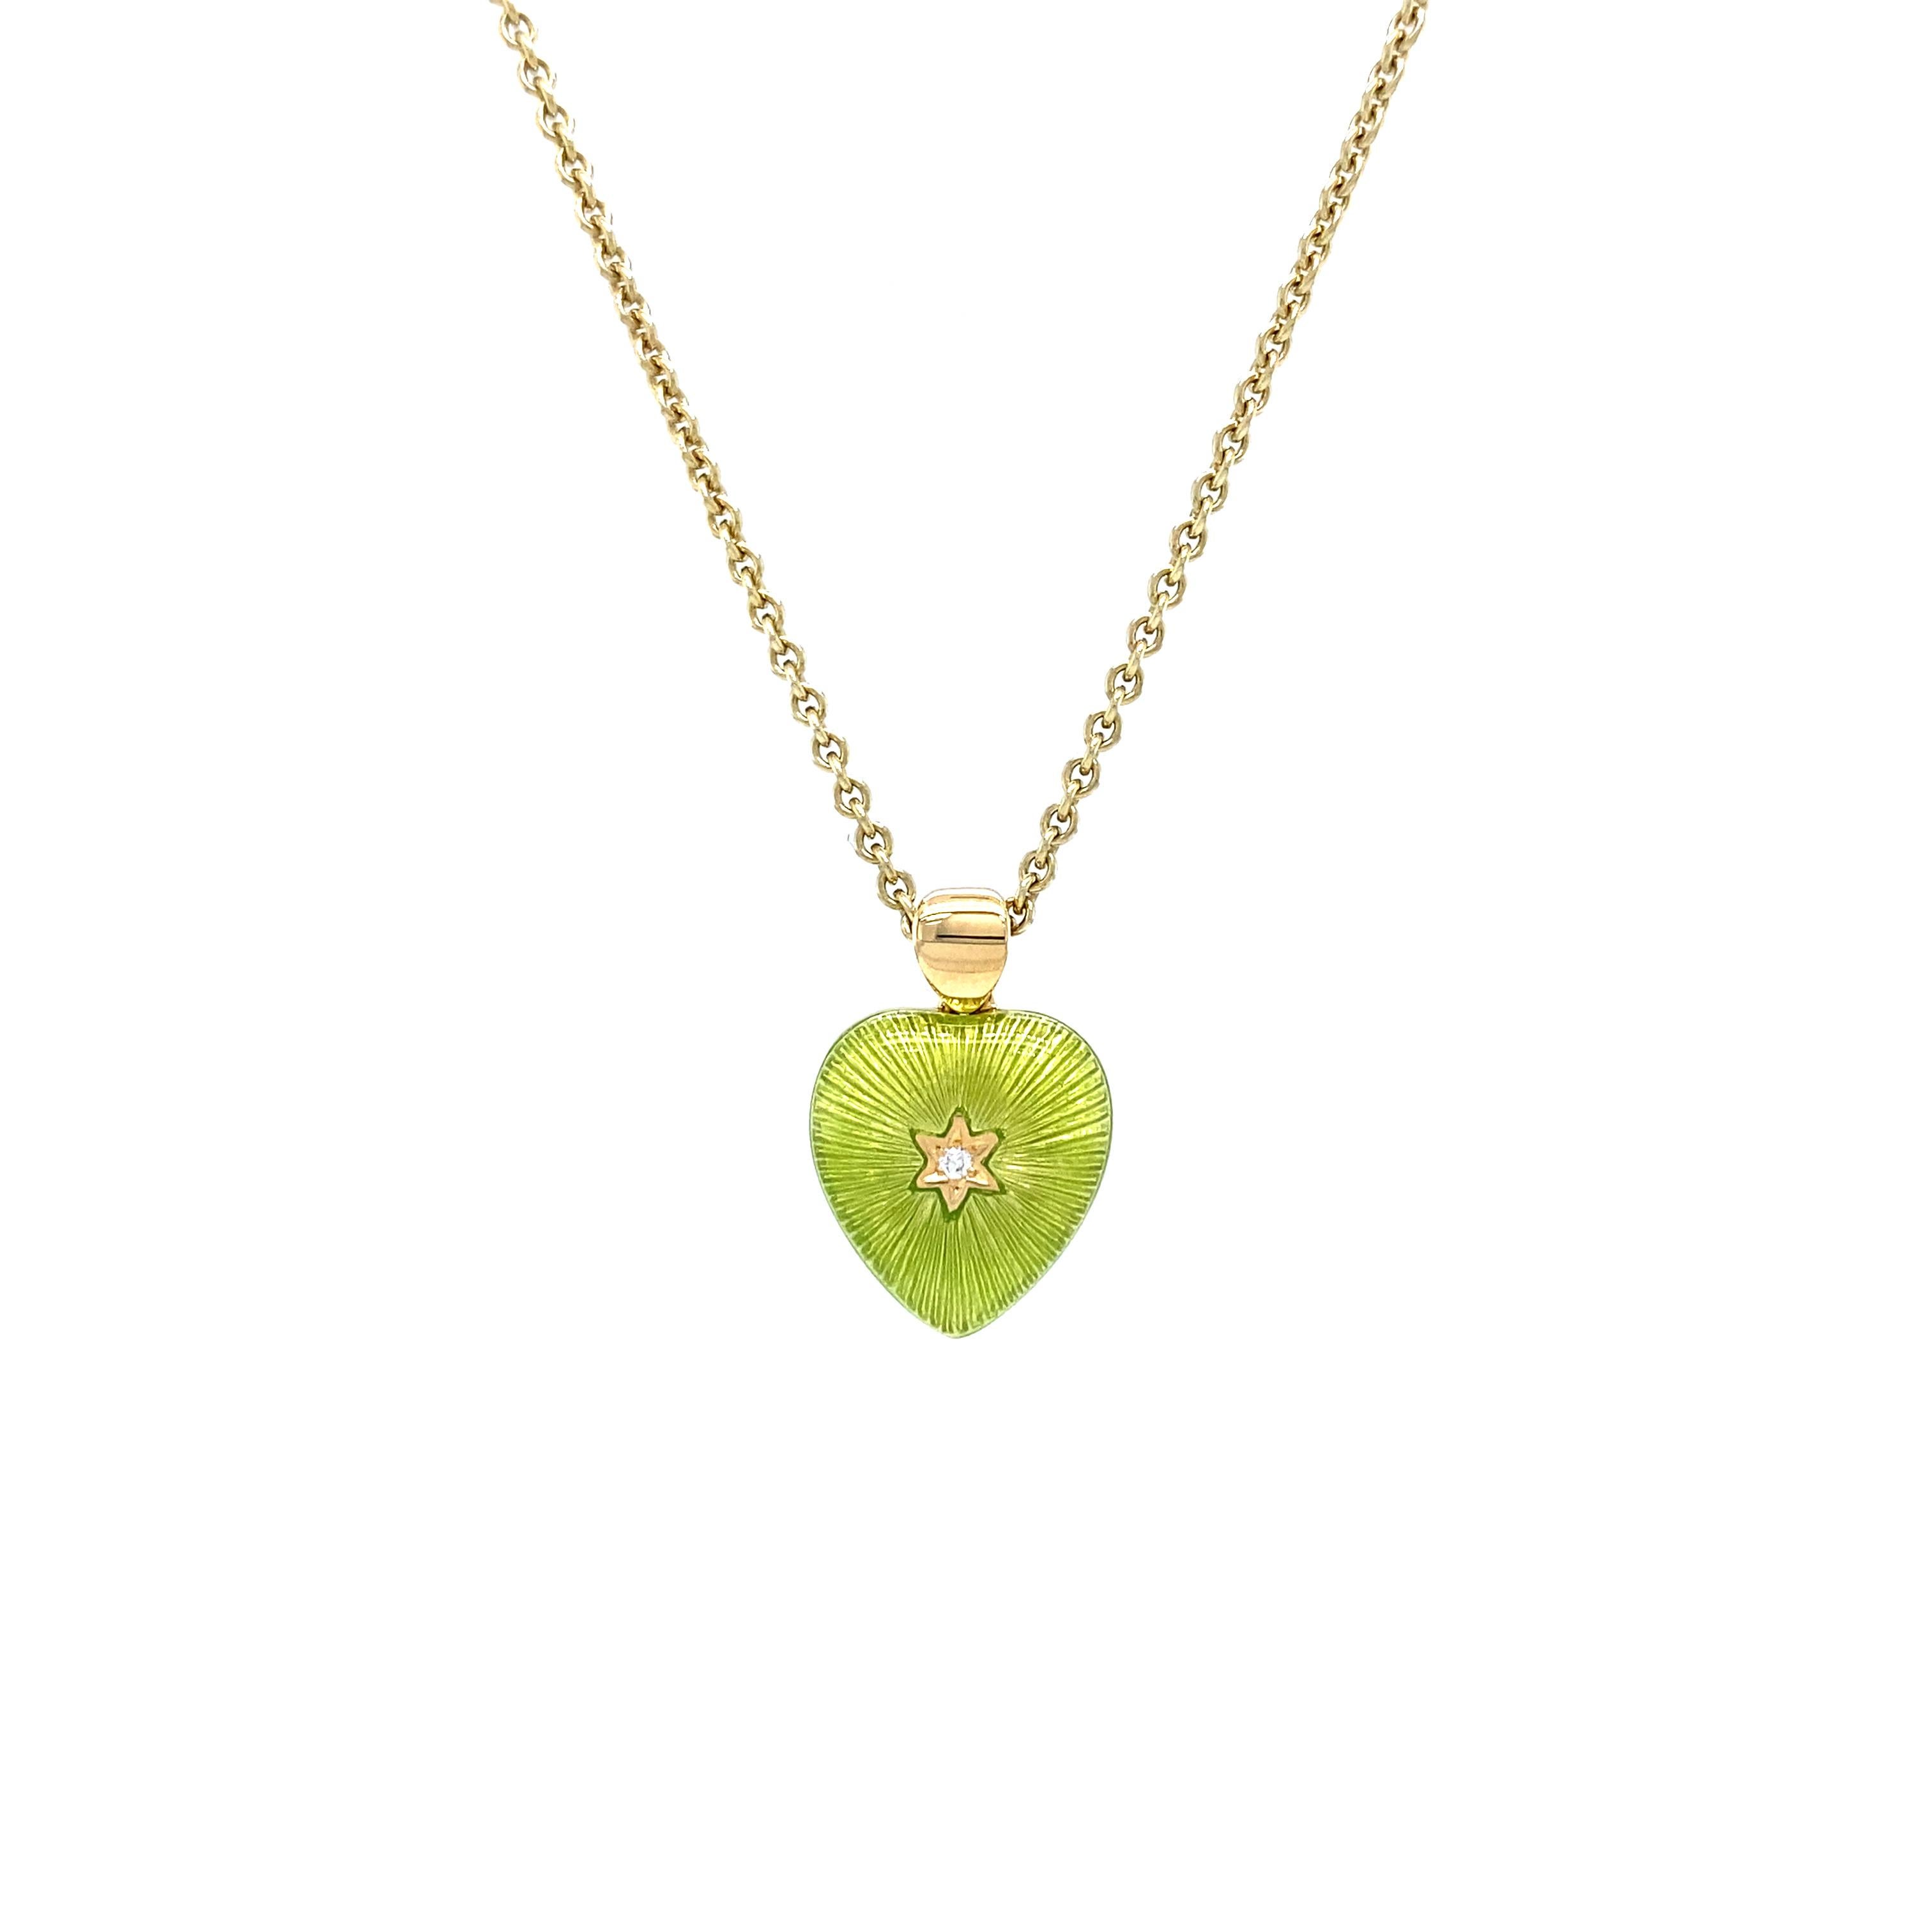 Brilliant Cut Heart Pendant Necklace 18k Yellow Gold Red and Green Enamel 2 Diamonds 2.02ct For Sale